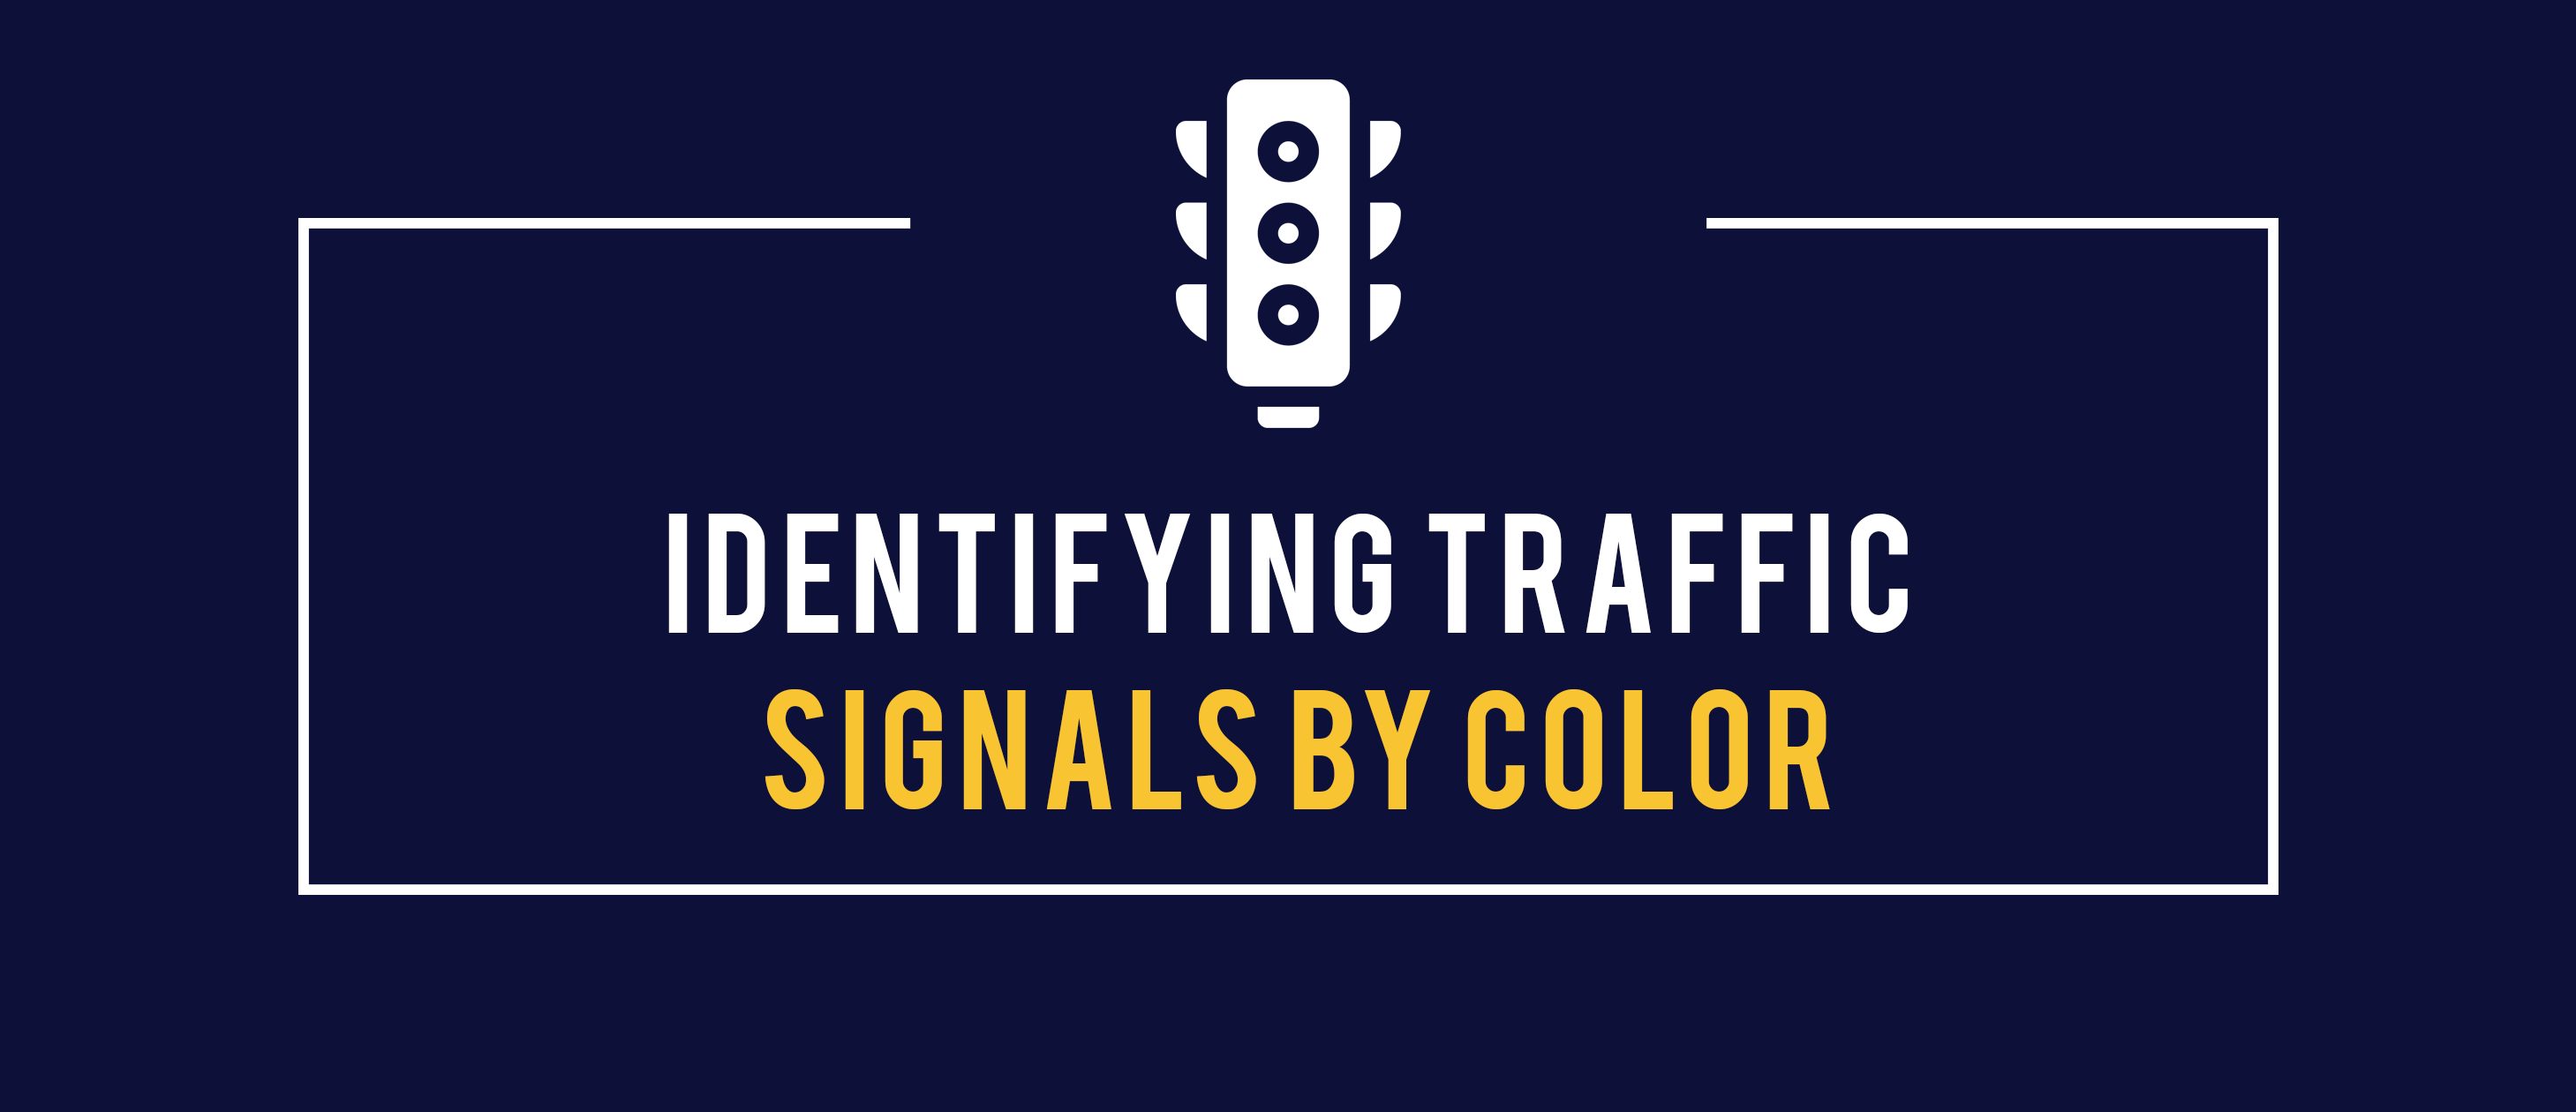 identifying traffic signals by color